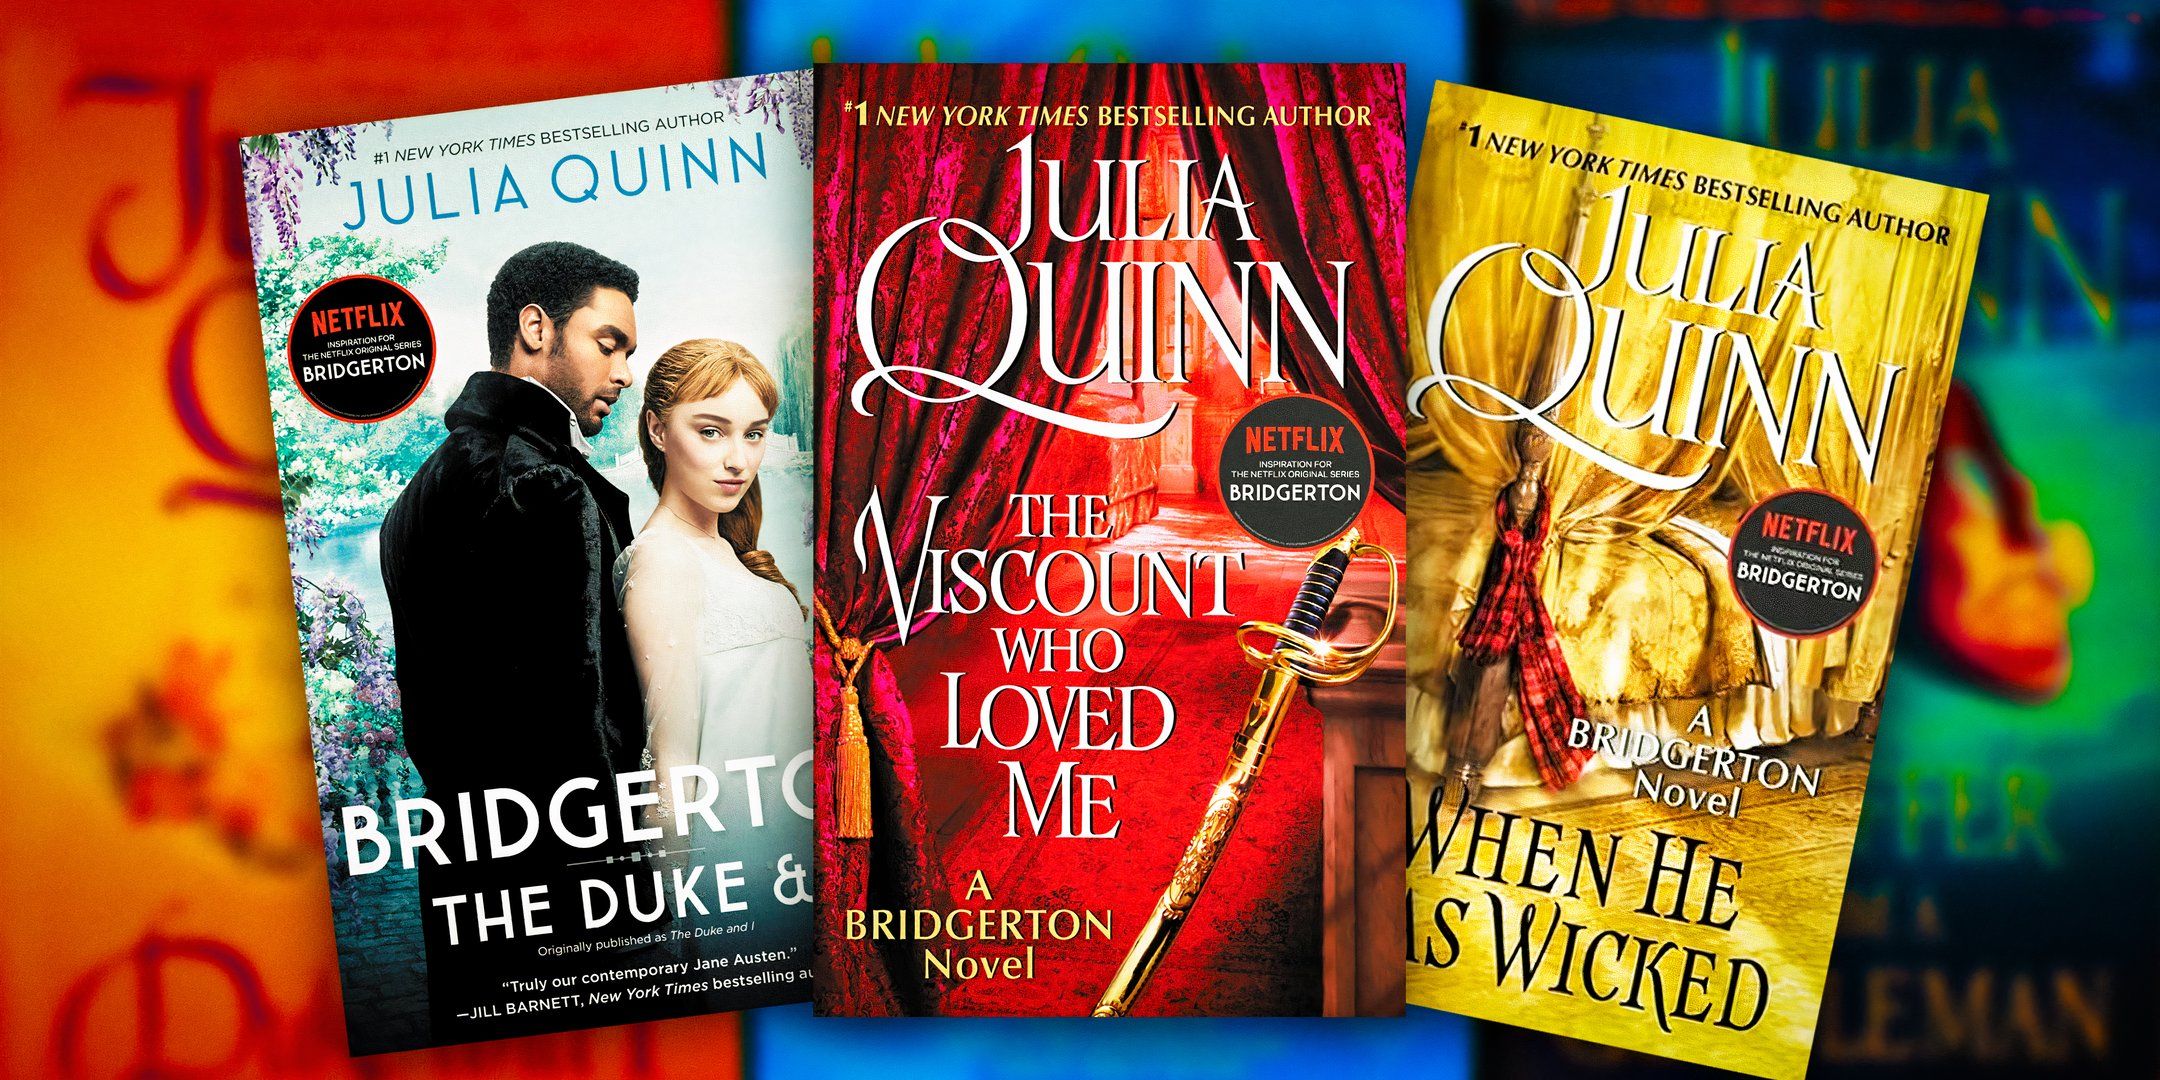 Regé-Jean Page as Simon Bassett and Phoebe Dynevor as Daphne Bridgerton on the cover of Bridgerton's The Duke and I and the covers of Bridgerton book 2 and 6